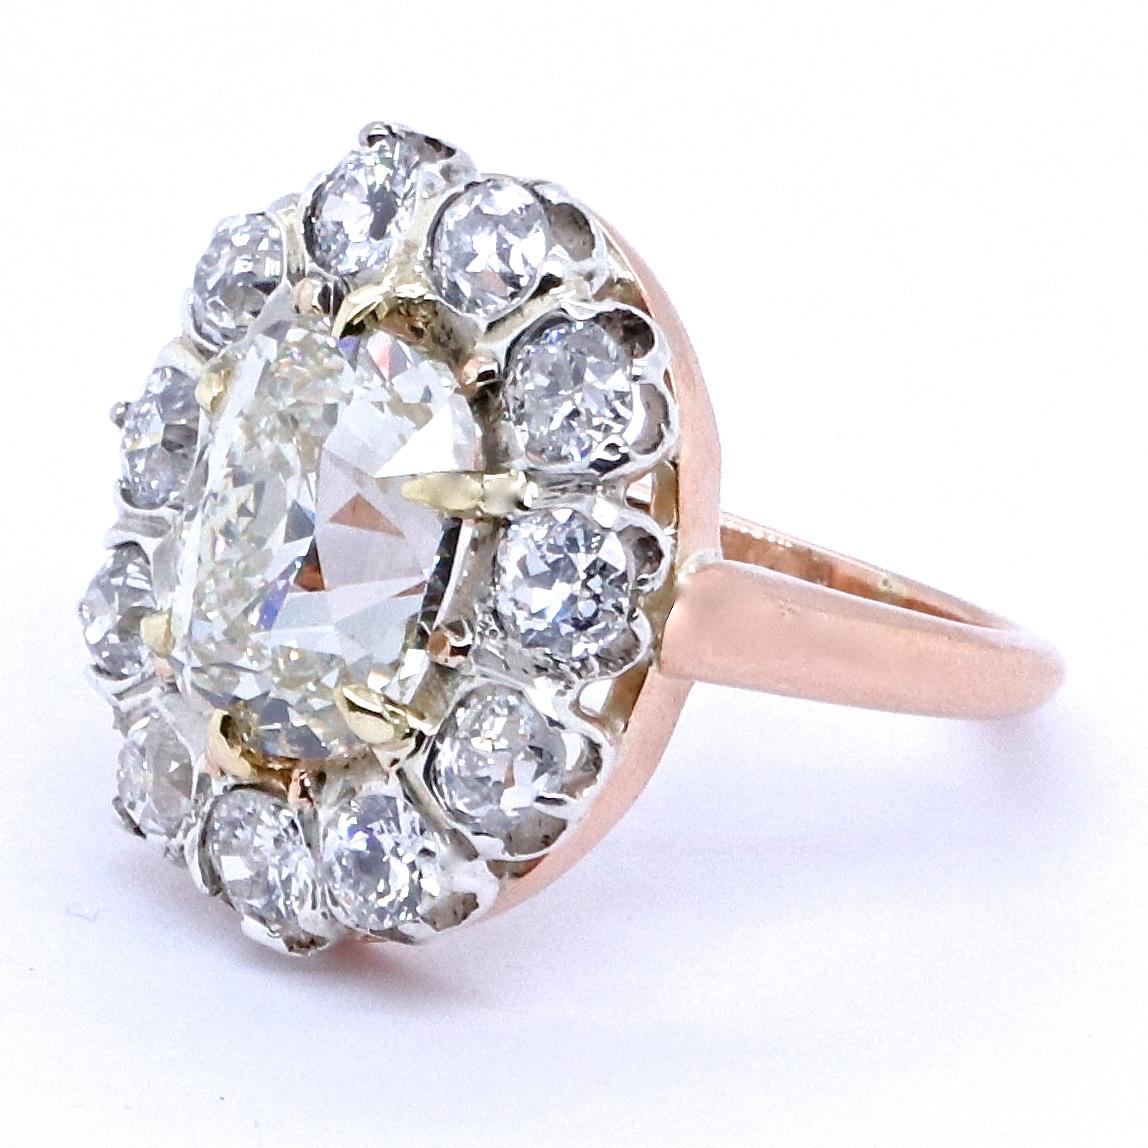 The sparkle and coverage of this cluster ring is outstanding. The beauty of a cluster ring is that you get a lot of diamonds and sparkle for a reasonable price. Resembling a flower motif the ring will also highlight your femininity. The center stone